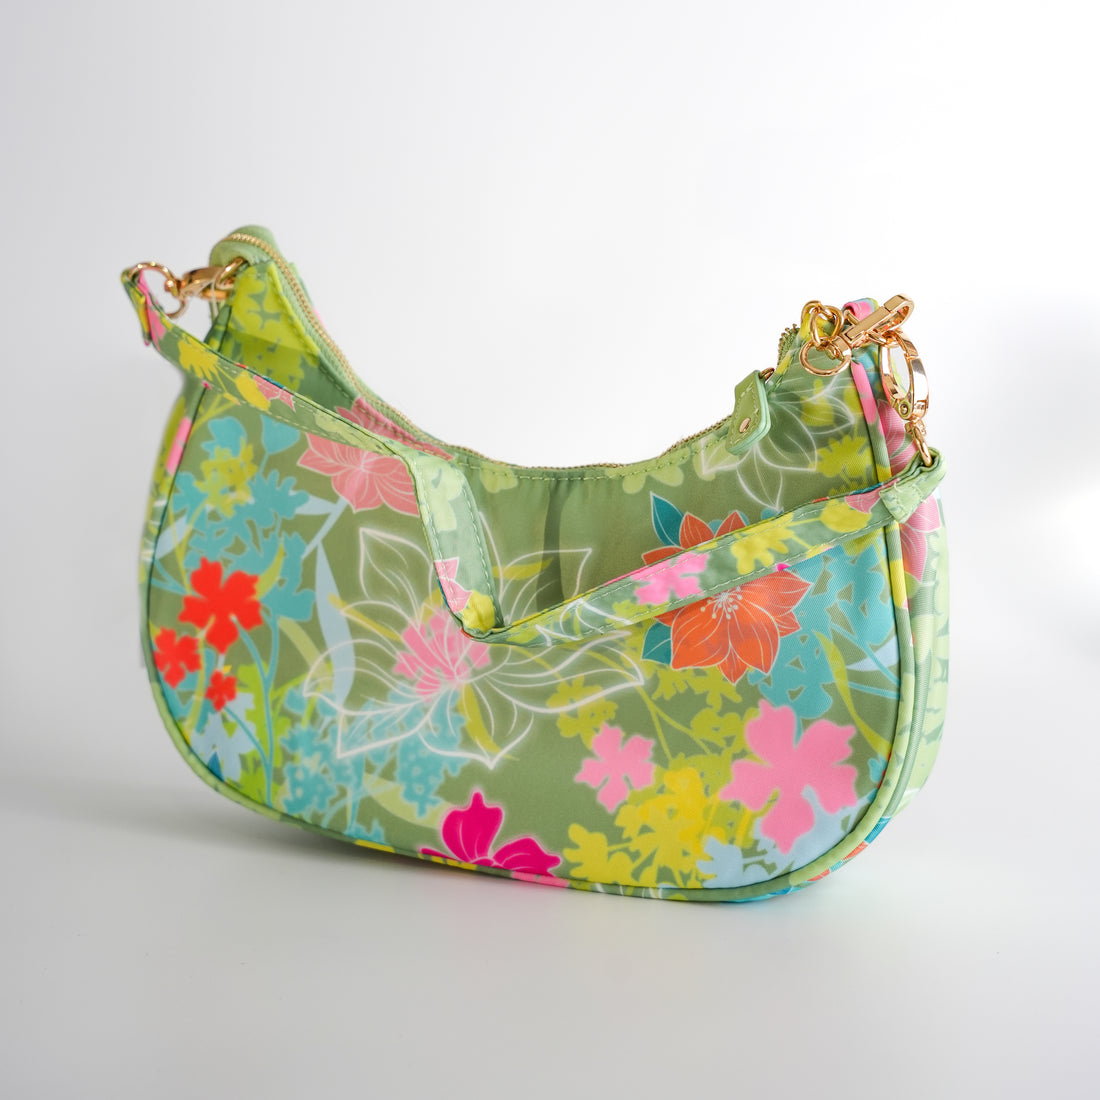 Tiana Shoulder Bag By Color Me Courtney – The Princess And The Frog